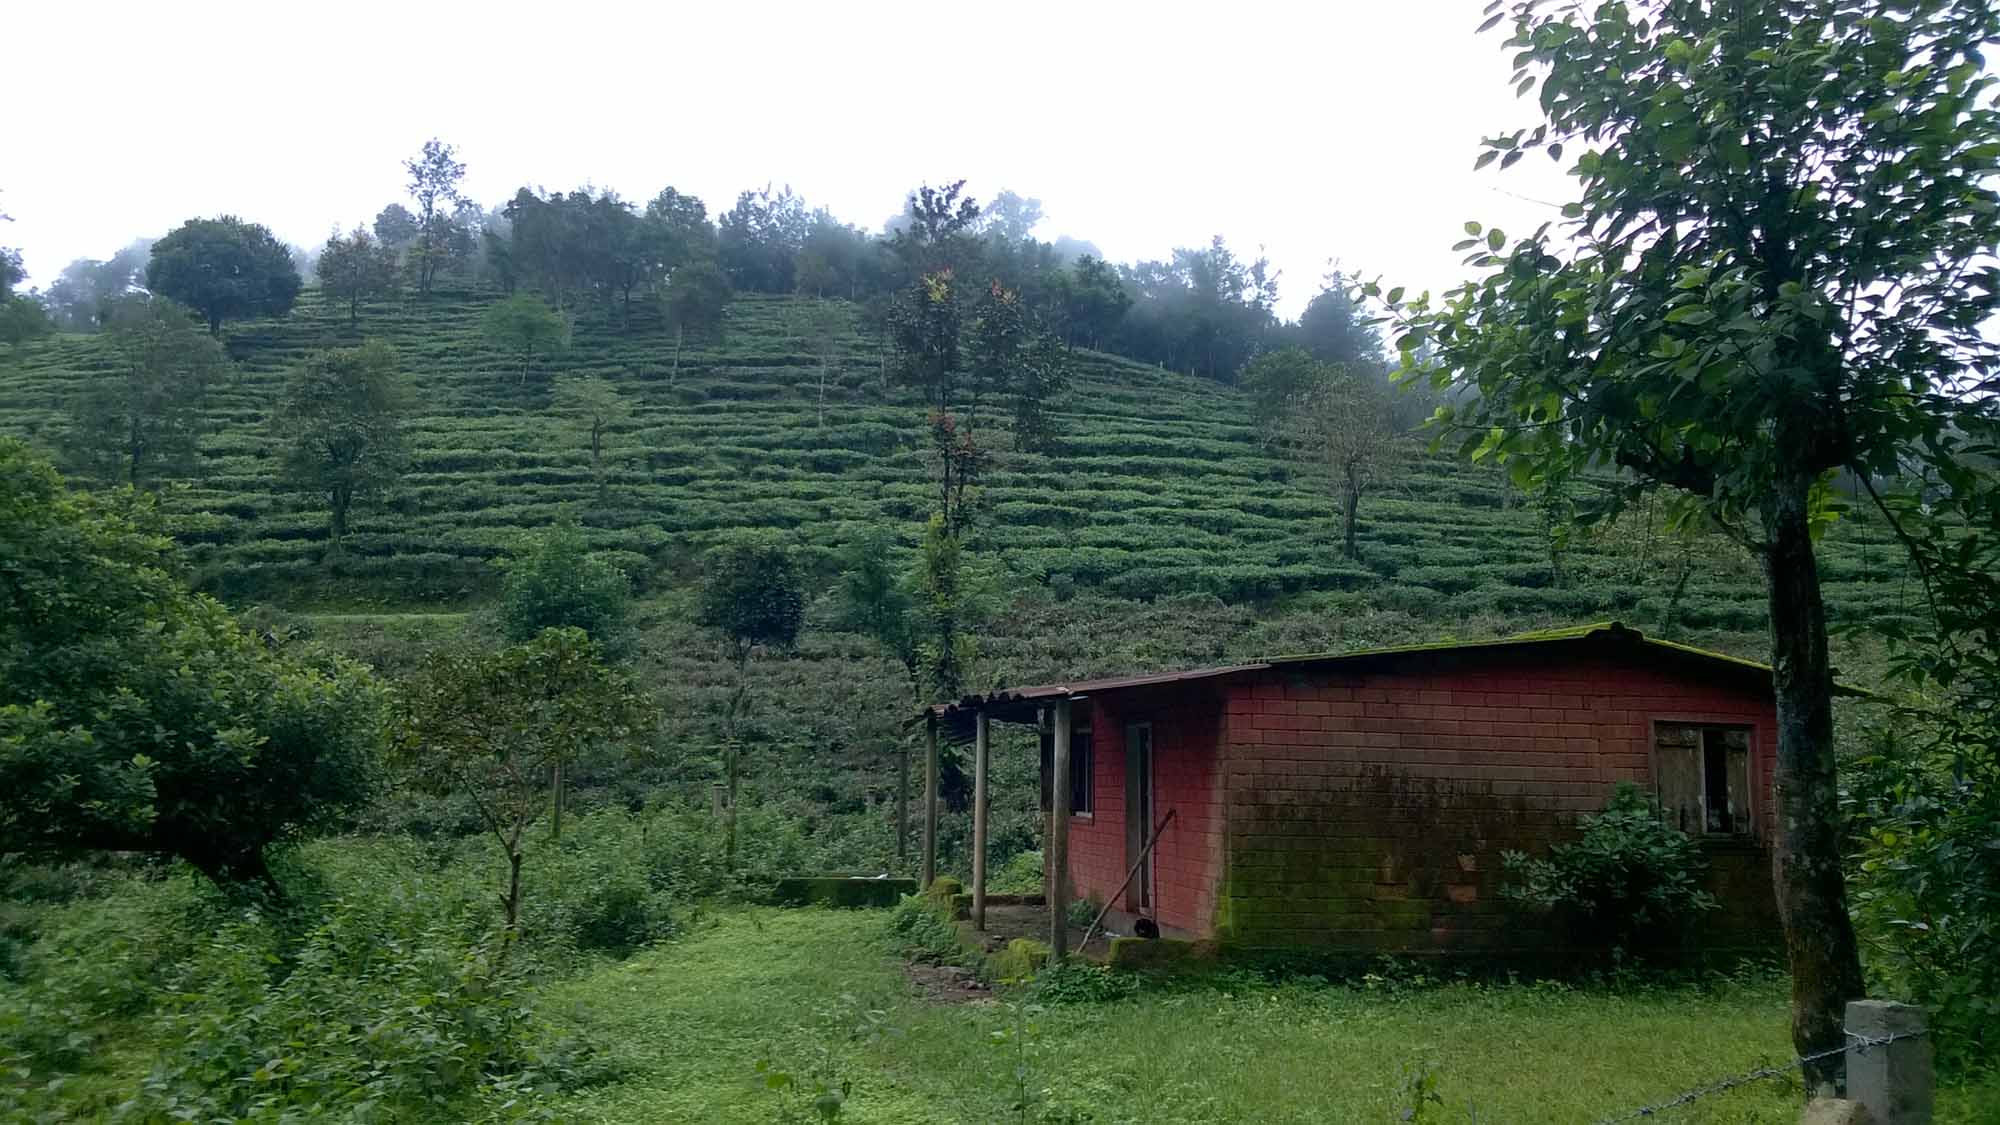 A one day trip to my relative’s new upcoming home stay in Lakkidi, Wayanad, Kerala, India